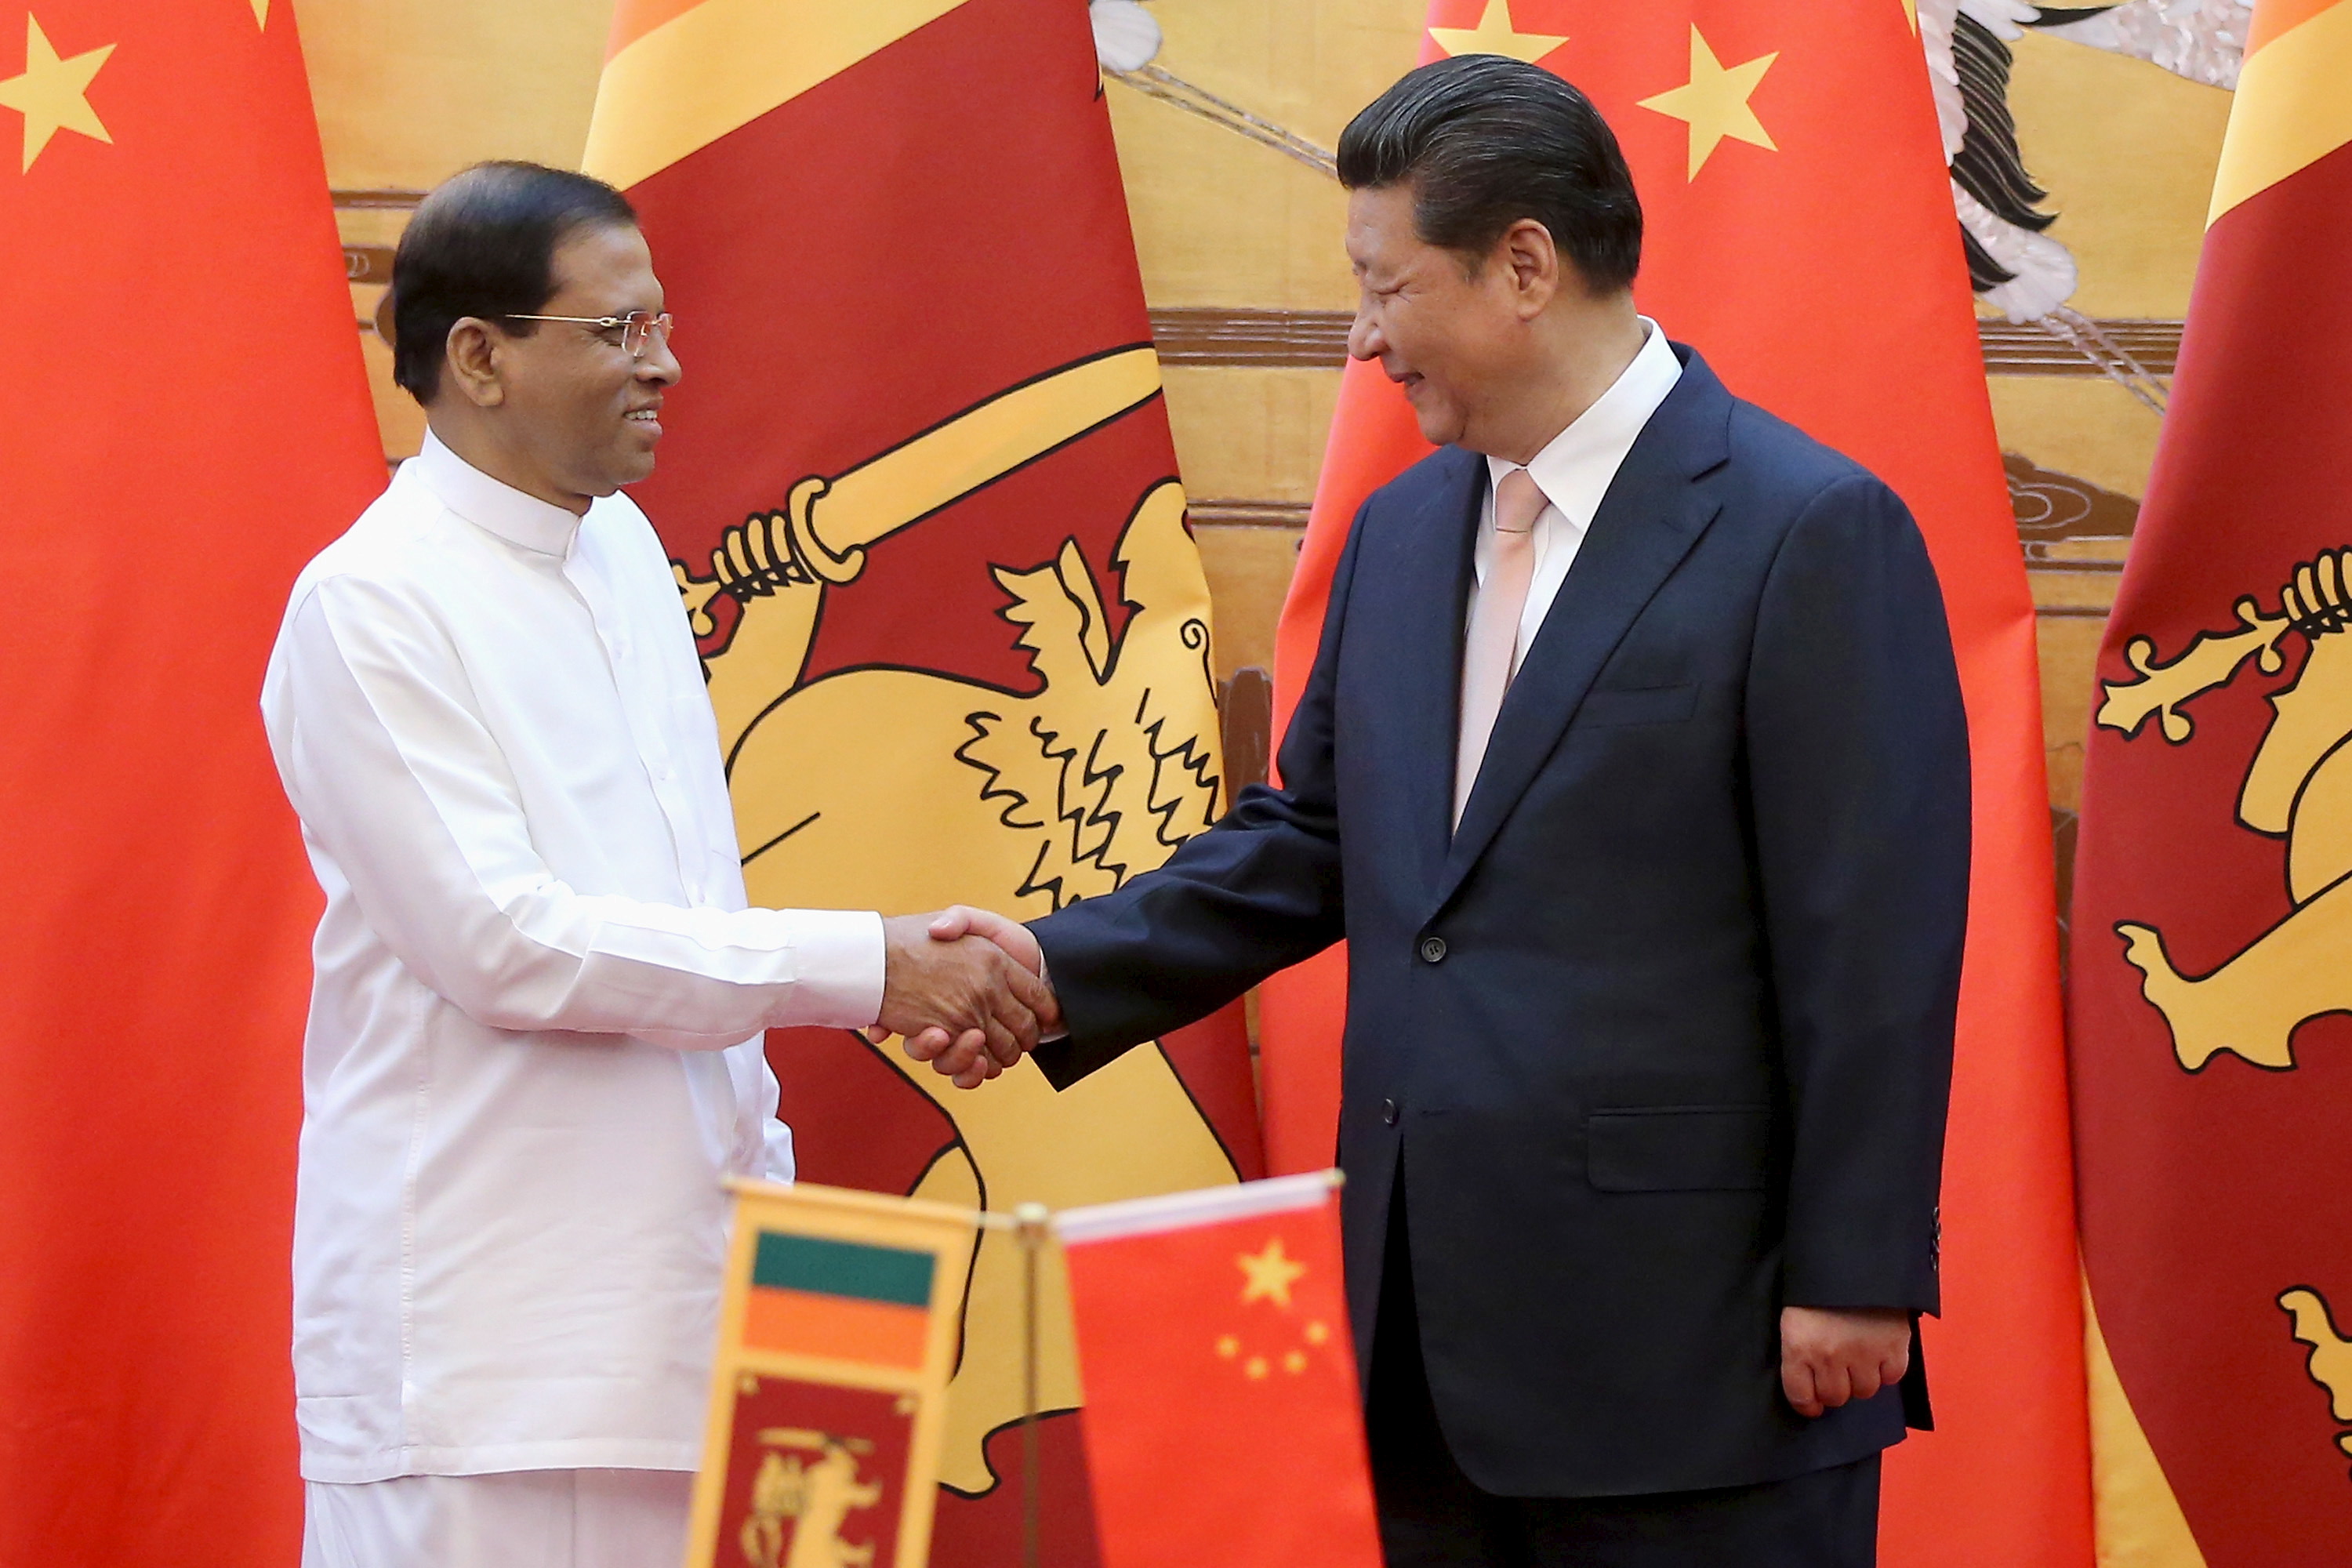 Sri Lankan President Maithripala Sirisena (Left) shakes hands with Chinese President Xi Jinping (Right) during a signing ceremony in the Great Hall of the People on March 26, 2015 in Beijing, China.  REUTERS/Feng Li-Poo/Pool - RTR4UWHZ